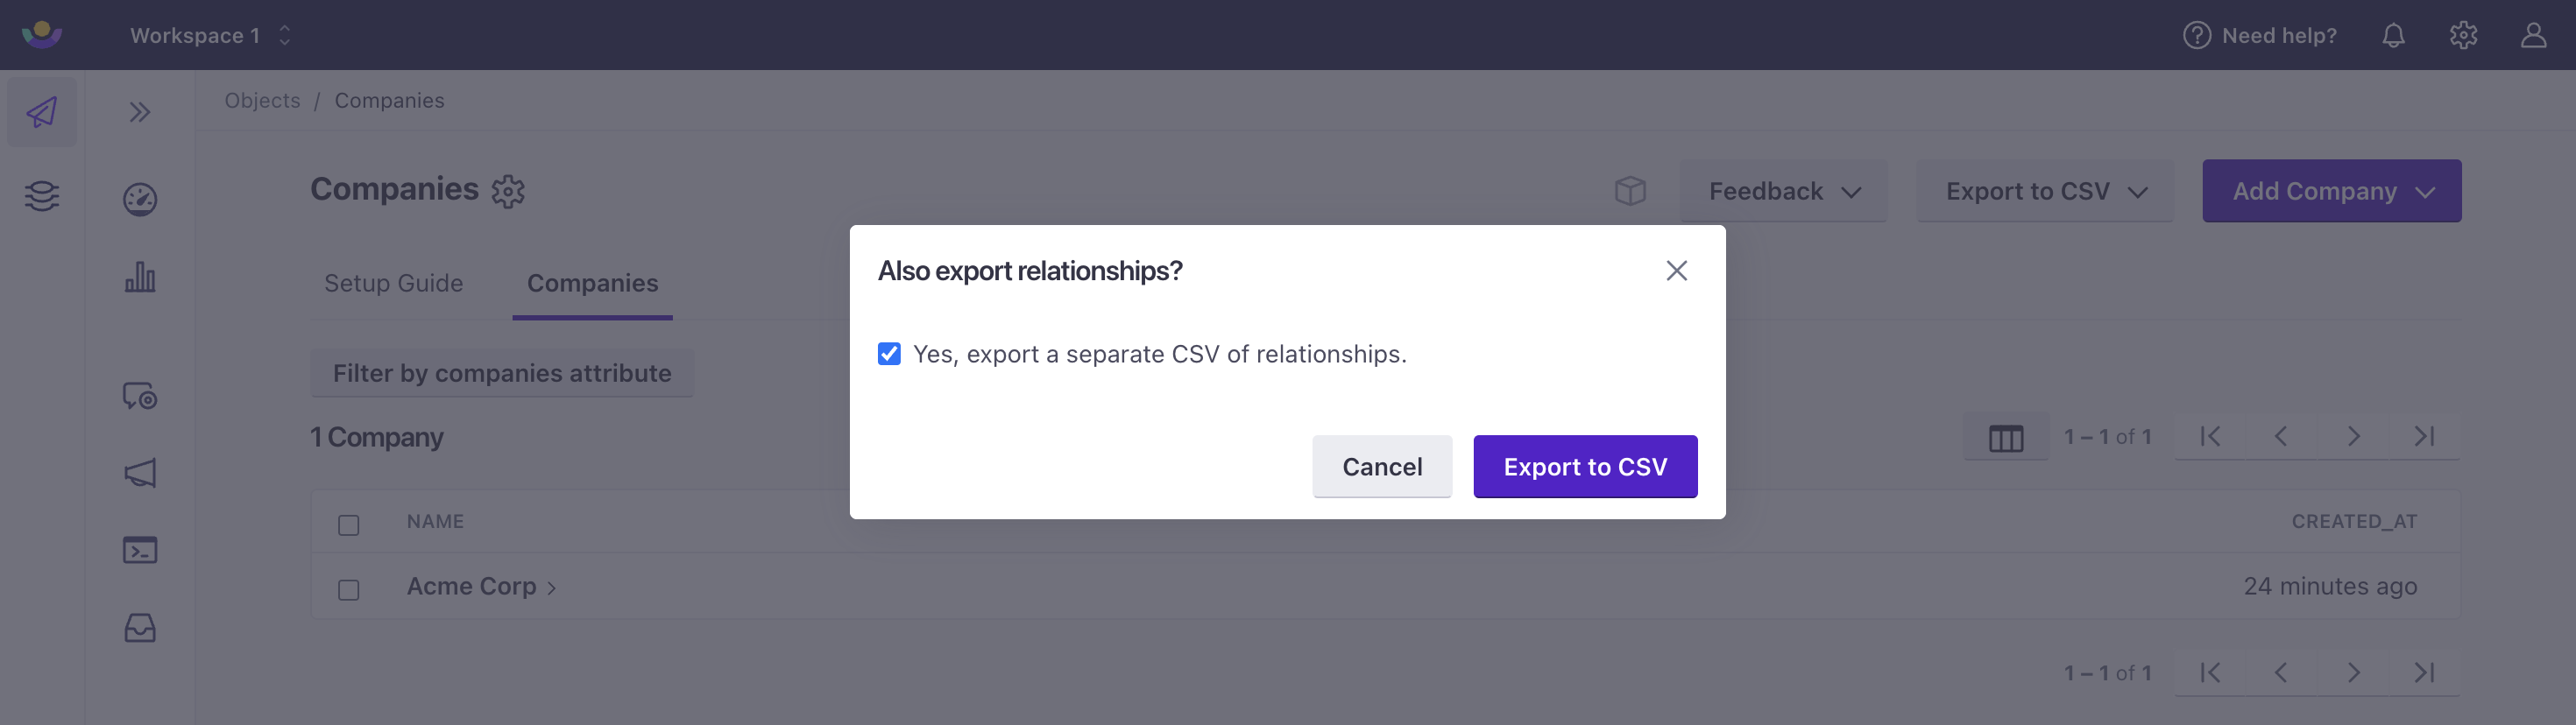 The box, labeled: Yes, export a separate CSV of relationships, is checked.